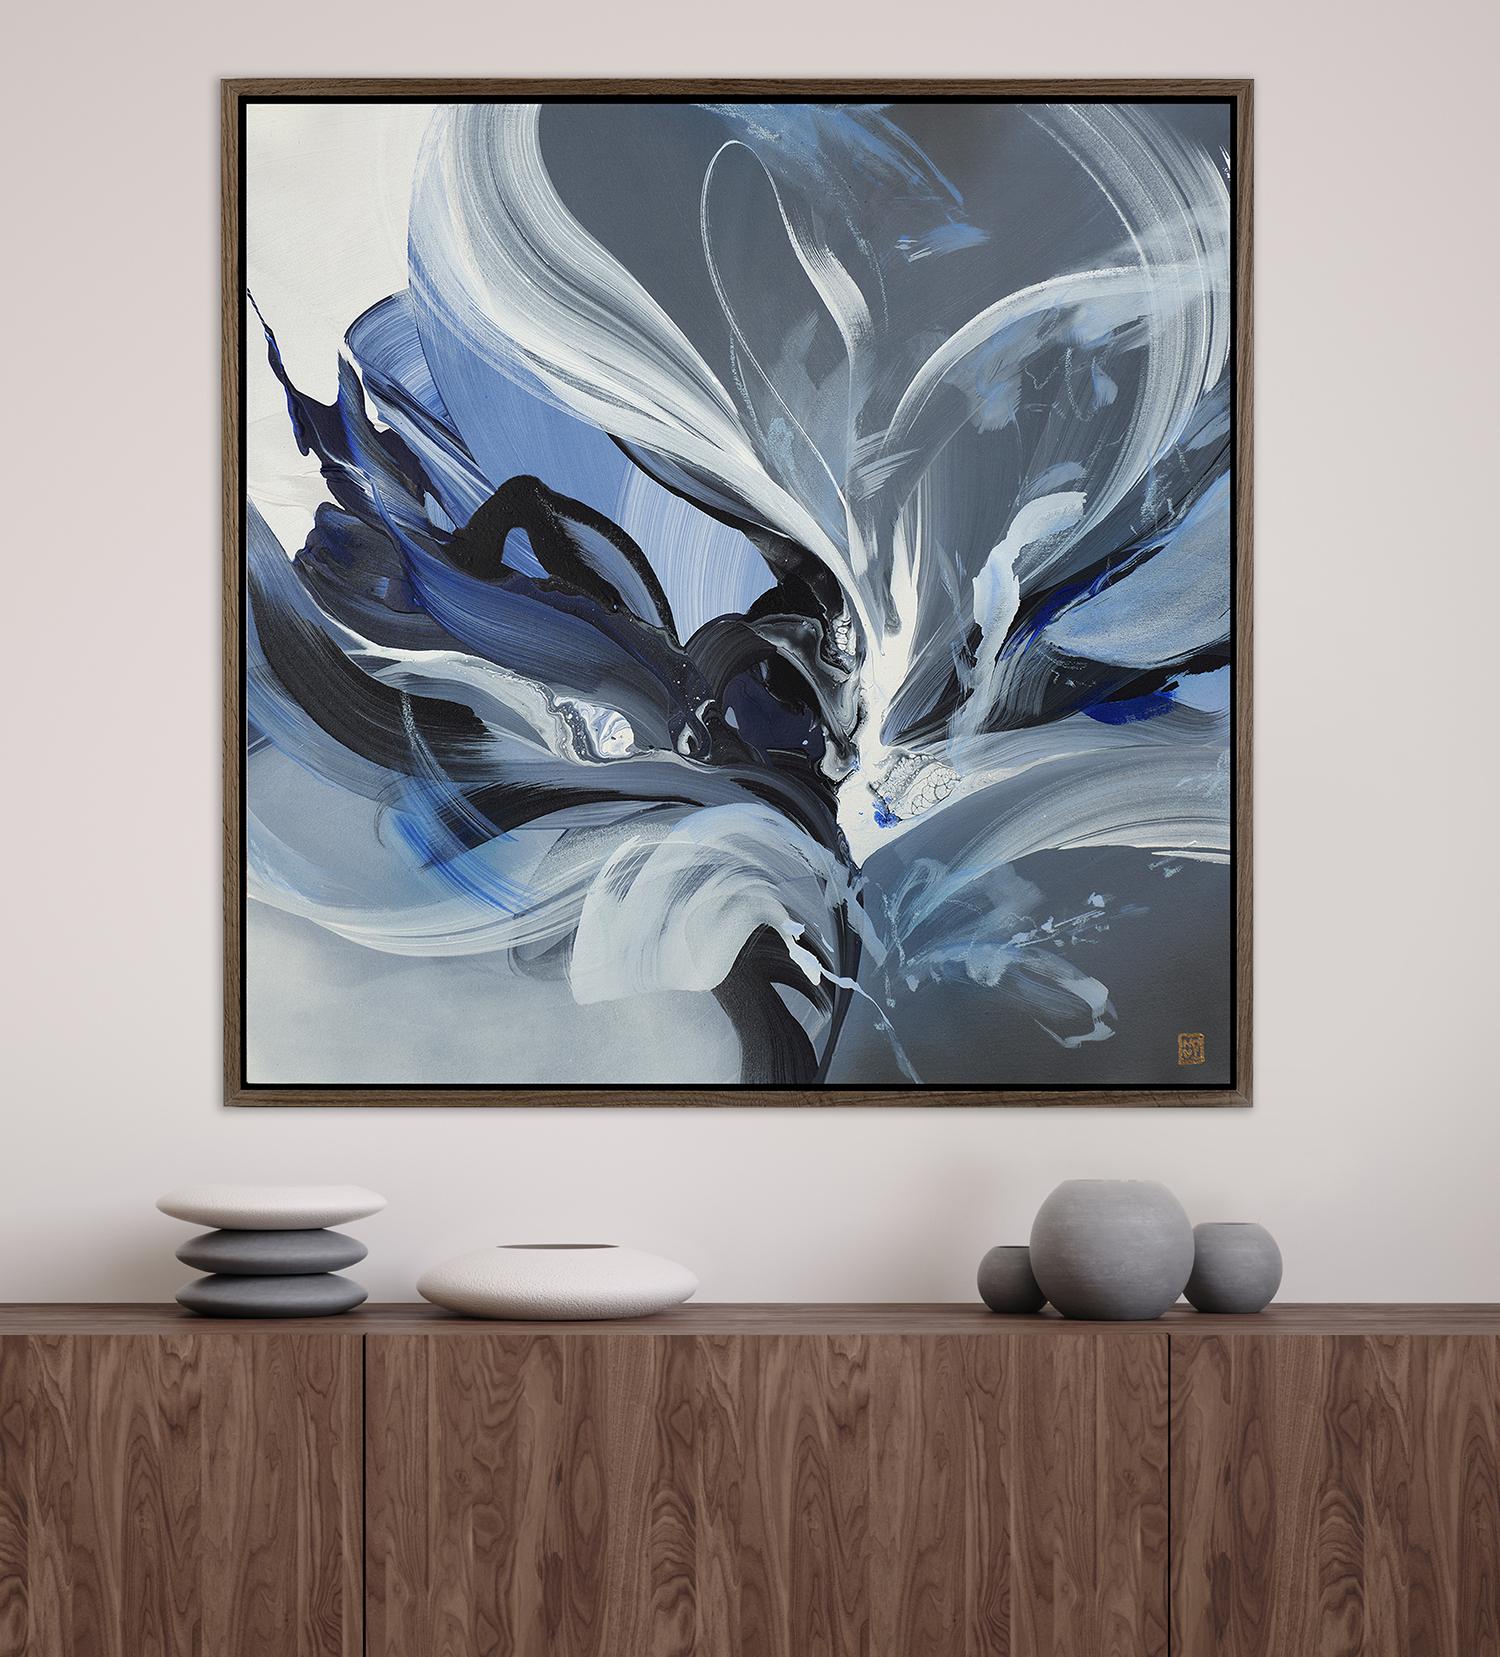 Yūgen, Original Contemporary Framed Blue Abstract Painting, 2021
31.5